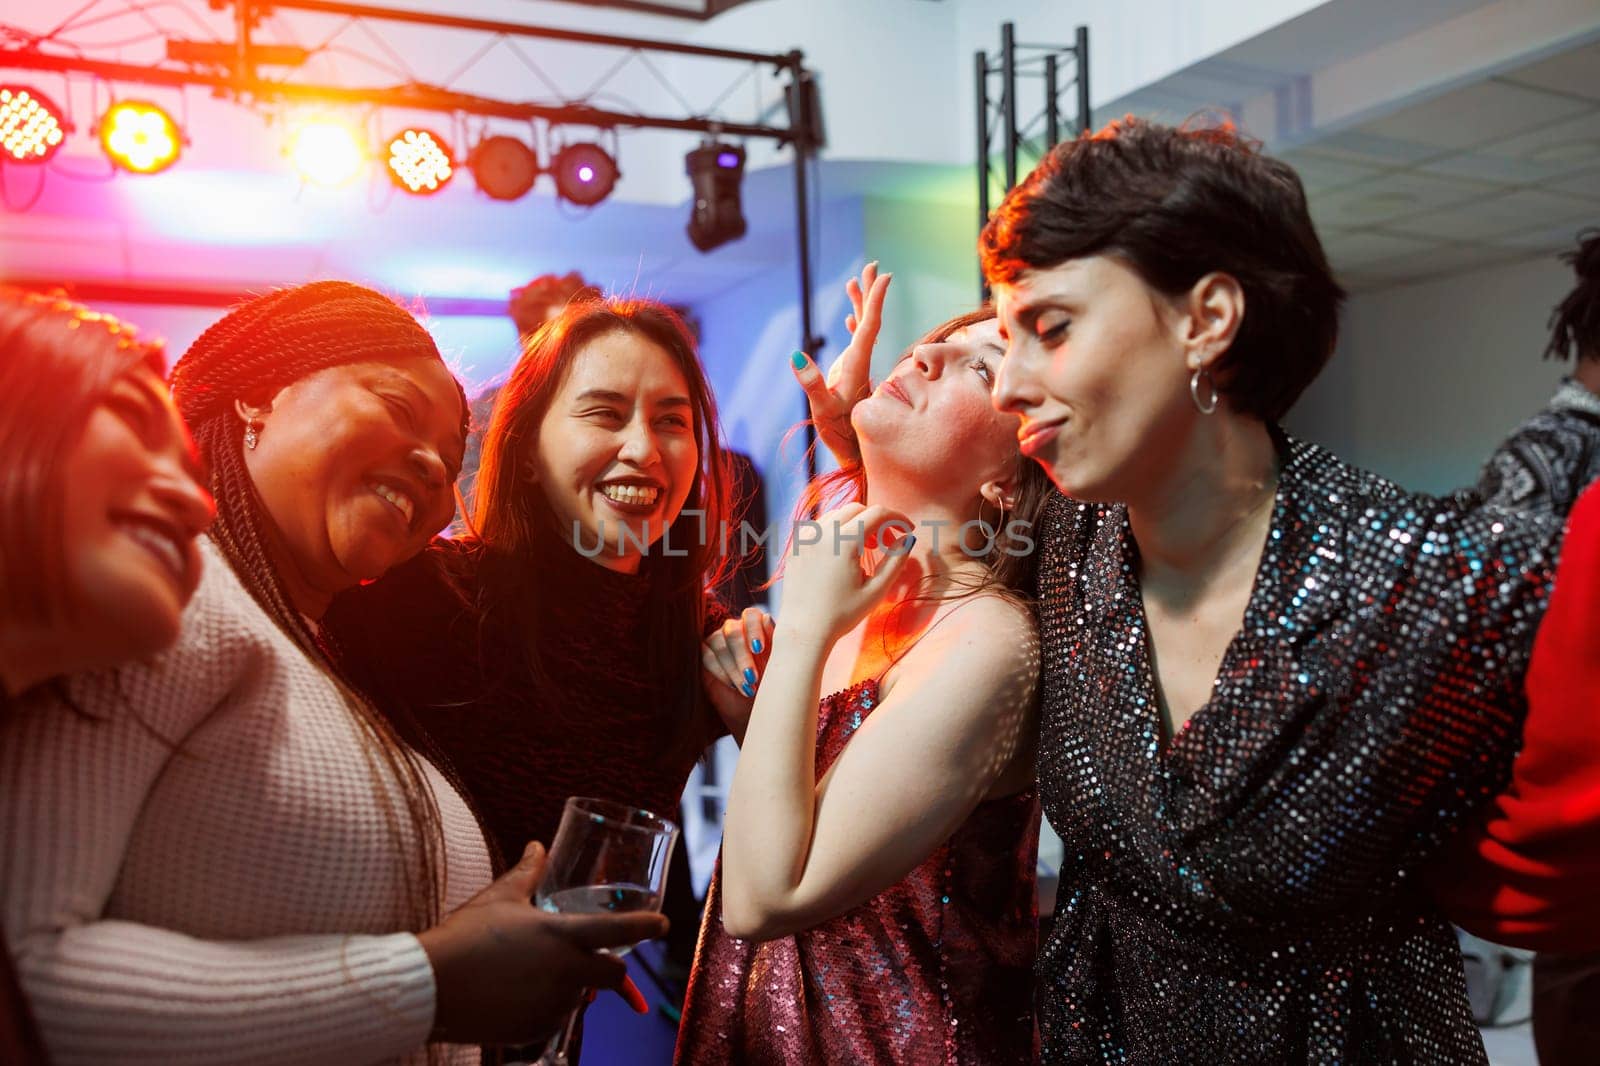 Women drinking alcohol and partying by DCStudio